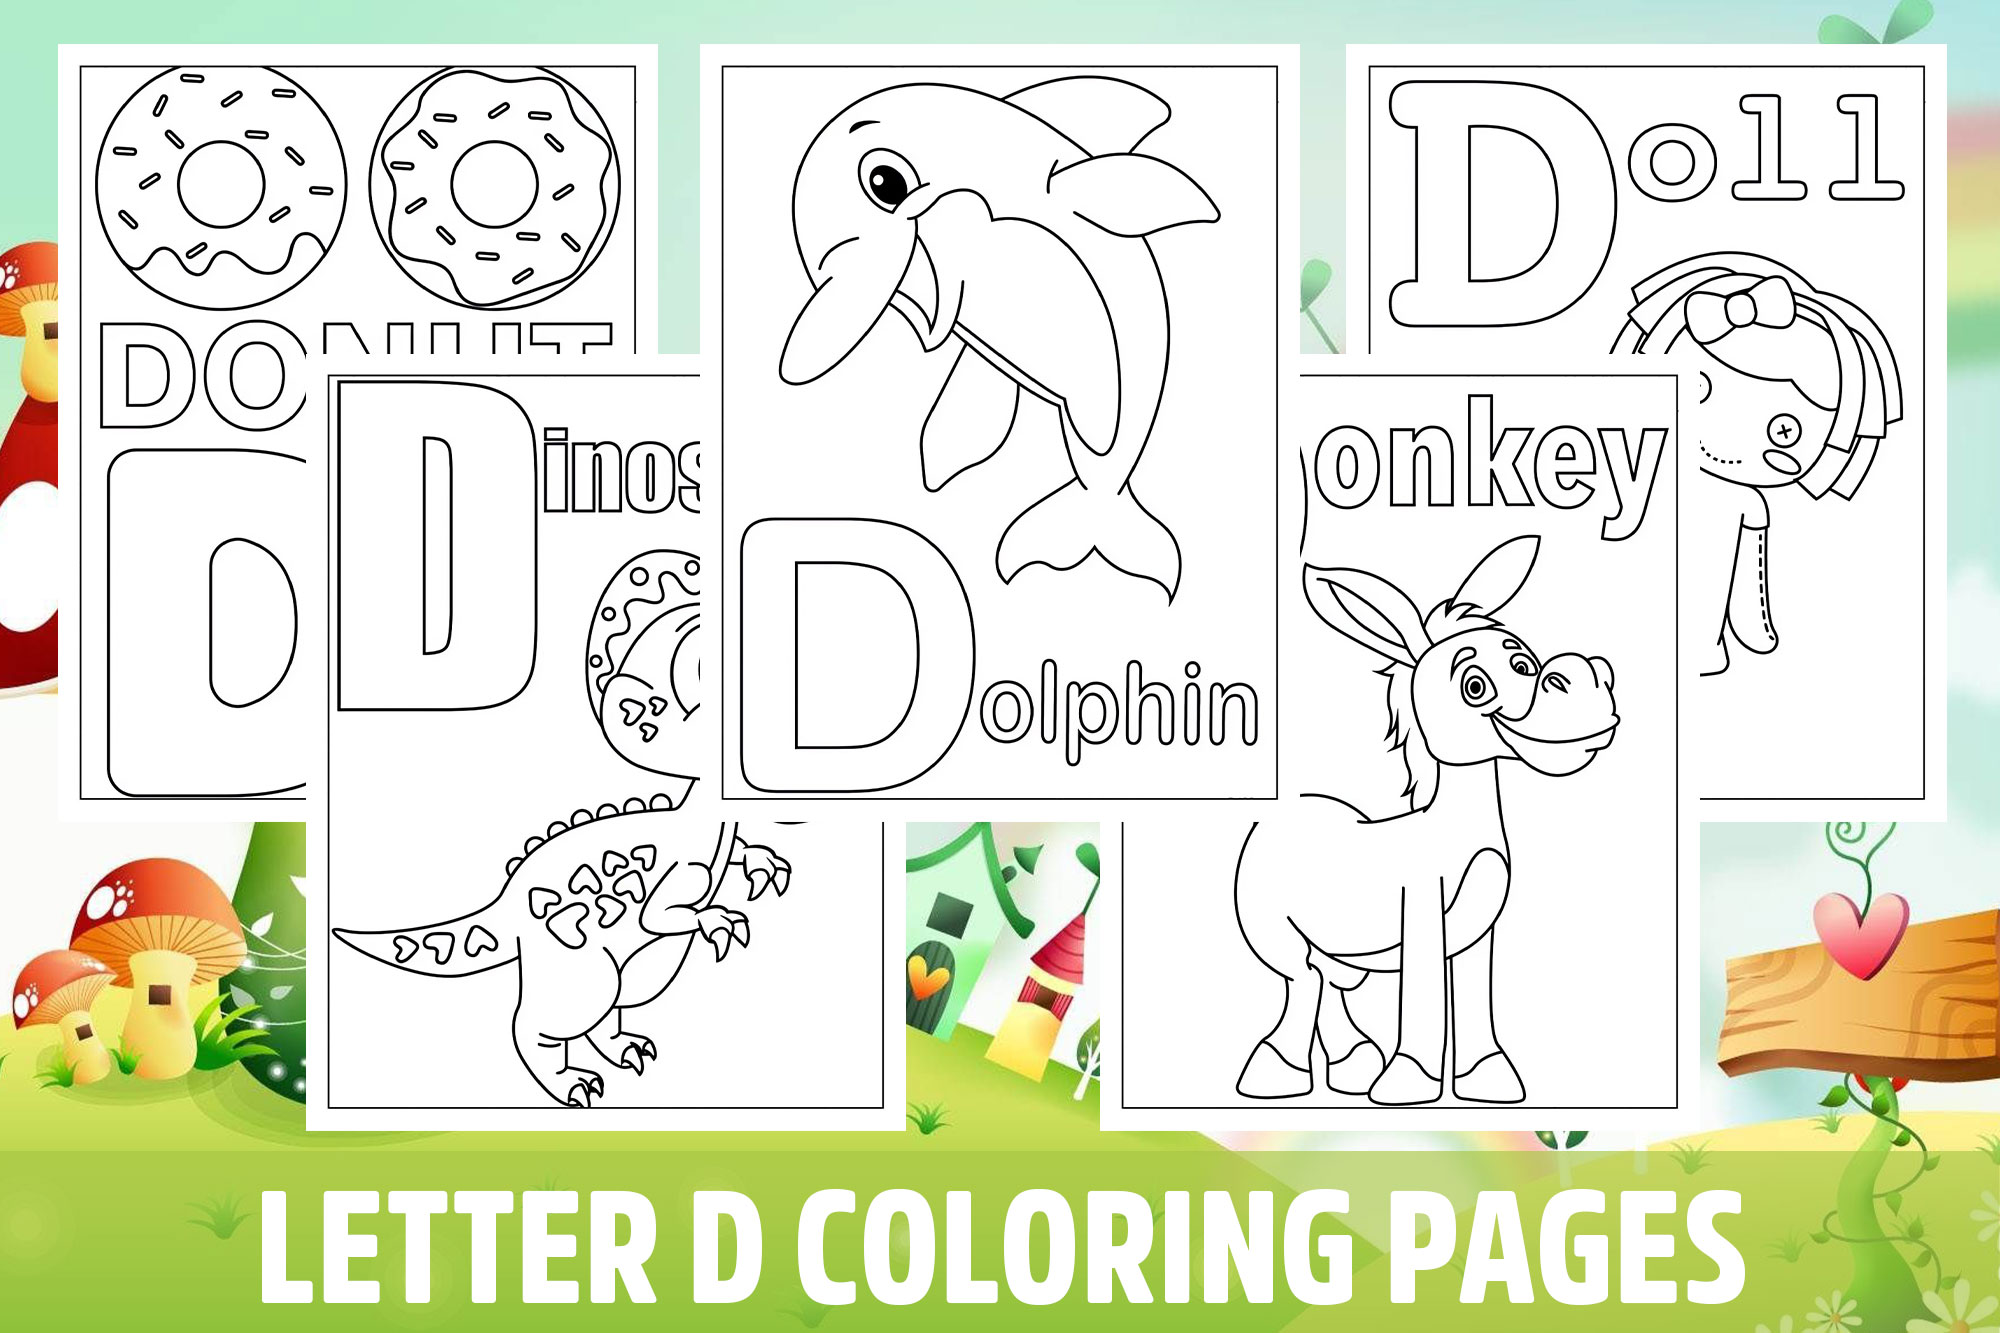 Letter d coloring pages for kids girls boys teens birthday school activity made by teachers